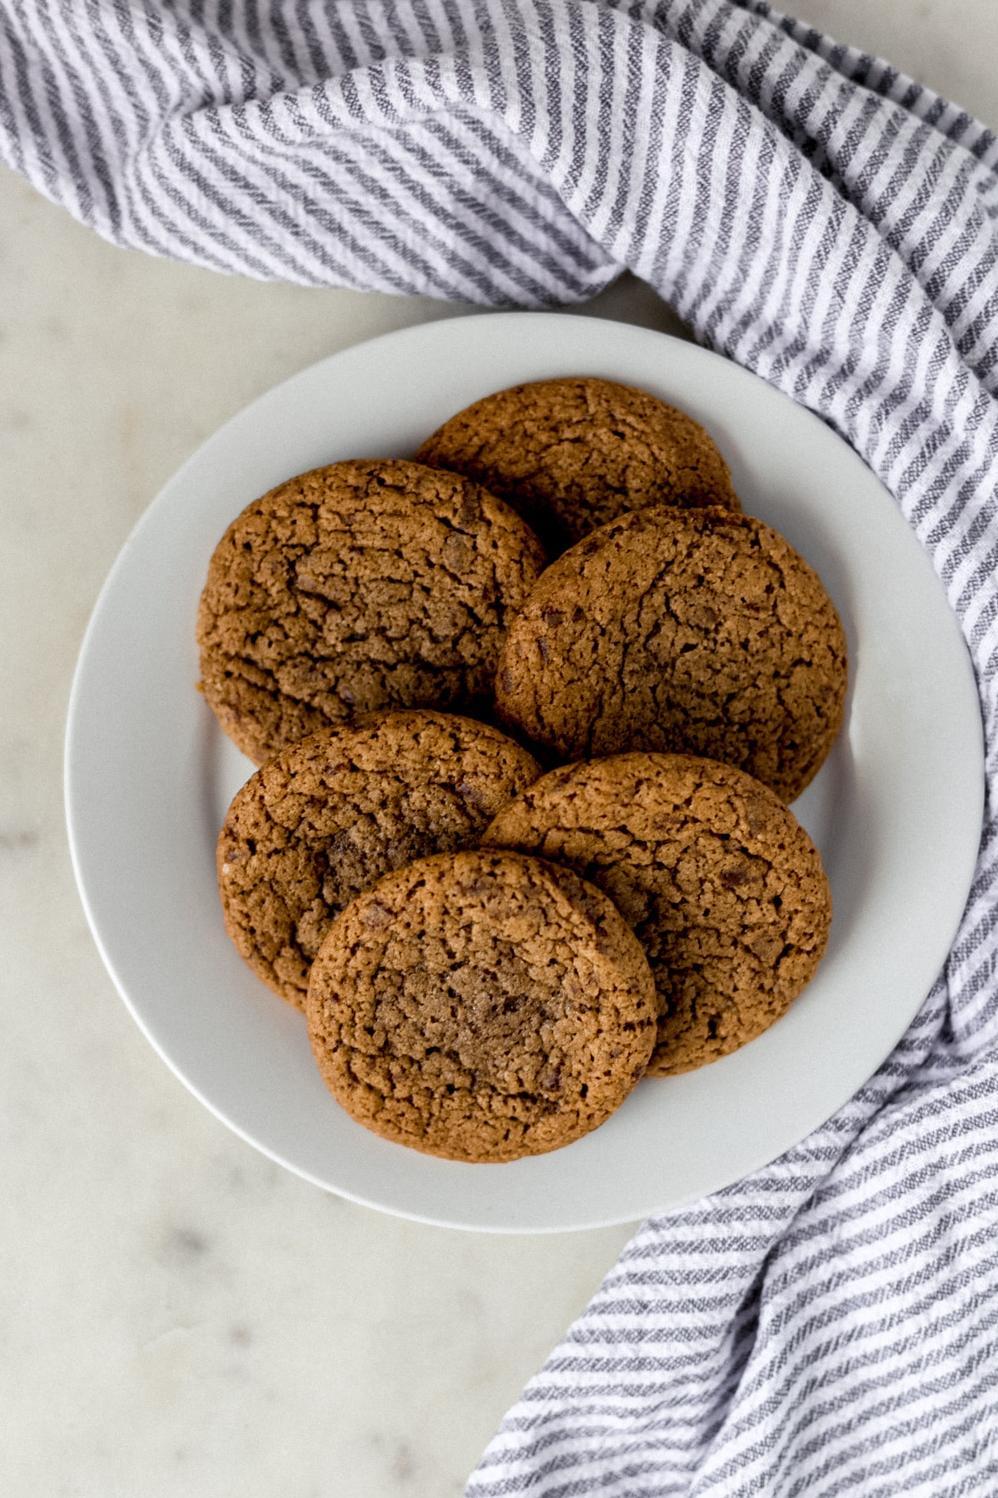  These coffee biscuits will satisfy your sweet and caffeine cravings in one bite.